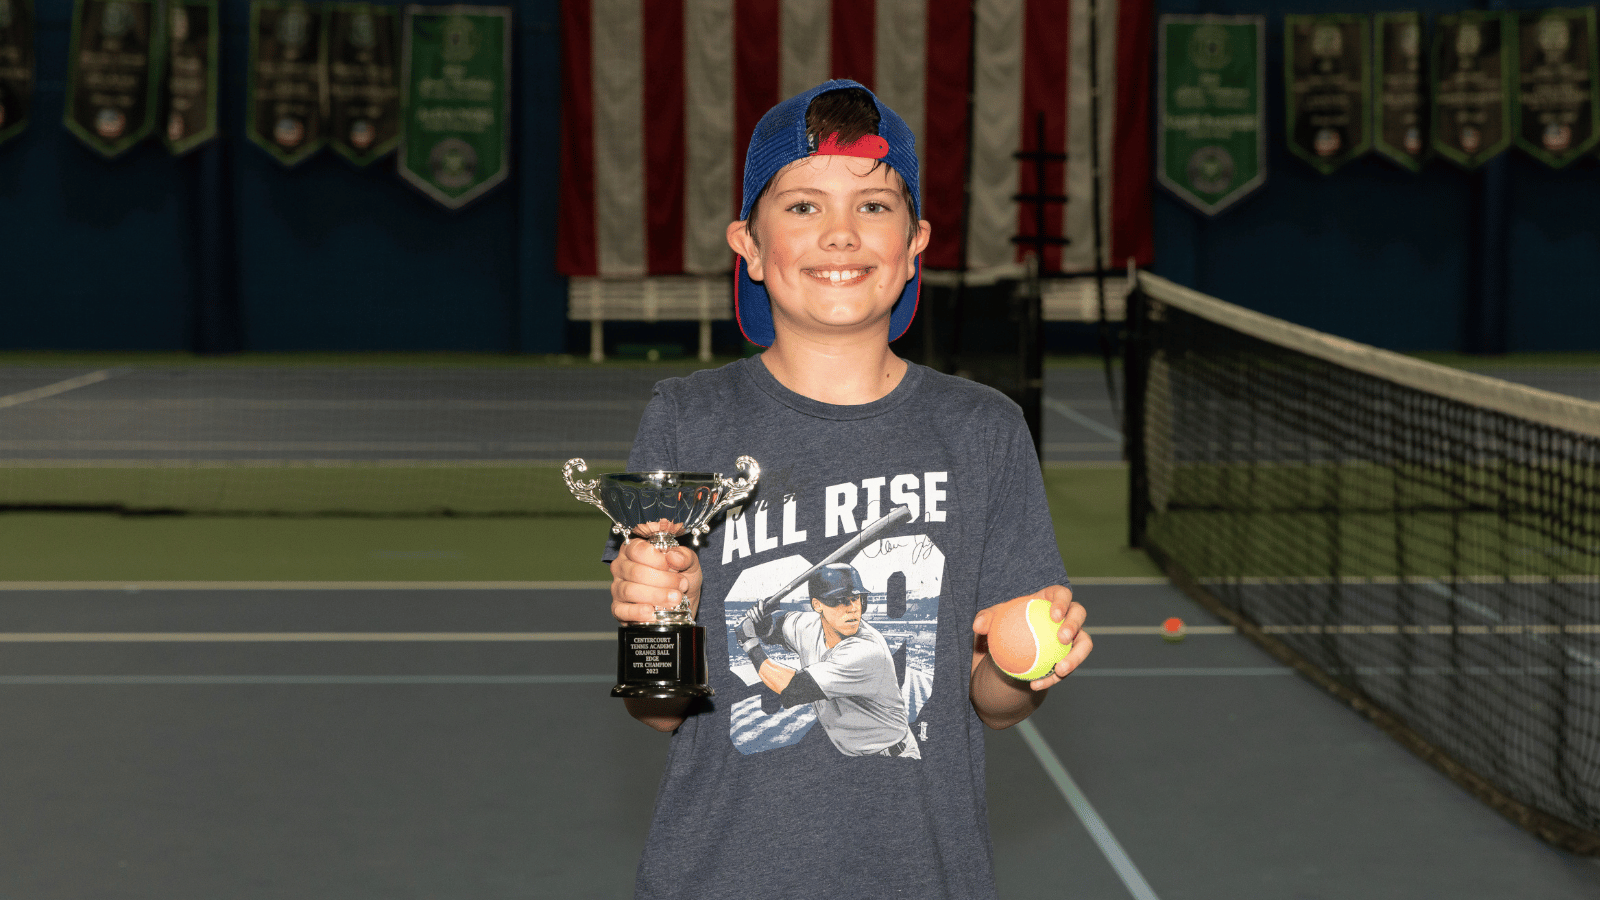 Young boy poses with trophy and orange ball after winning tournament